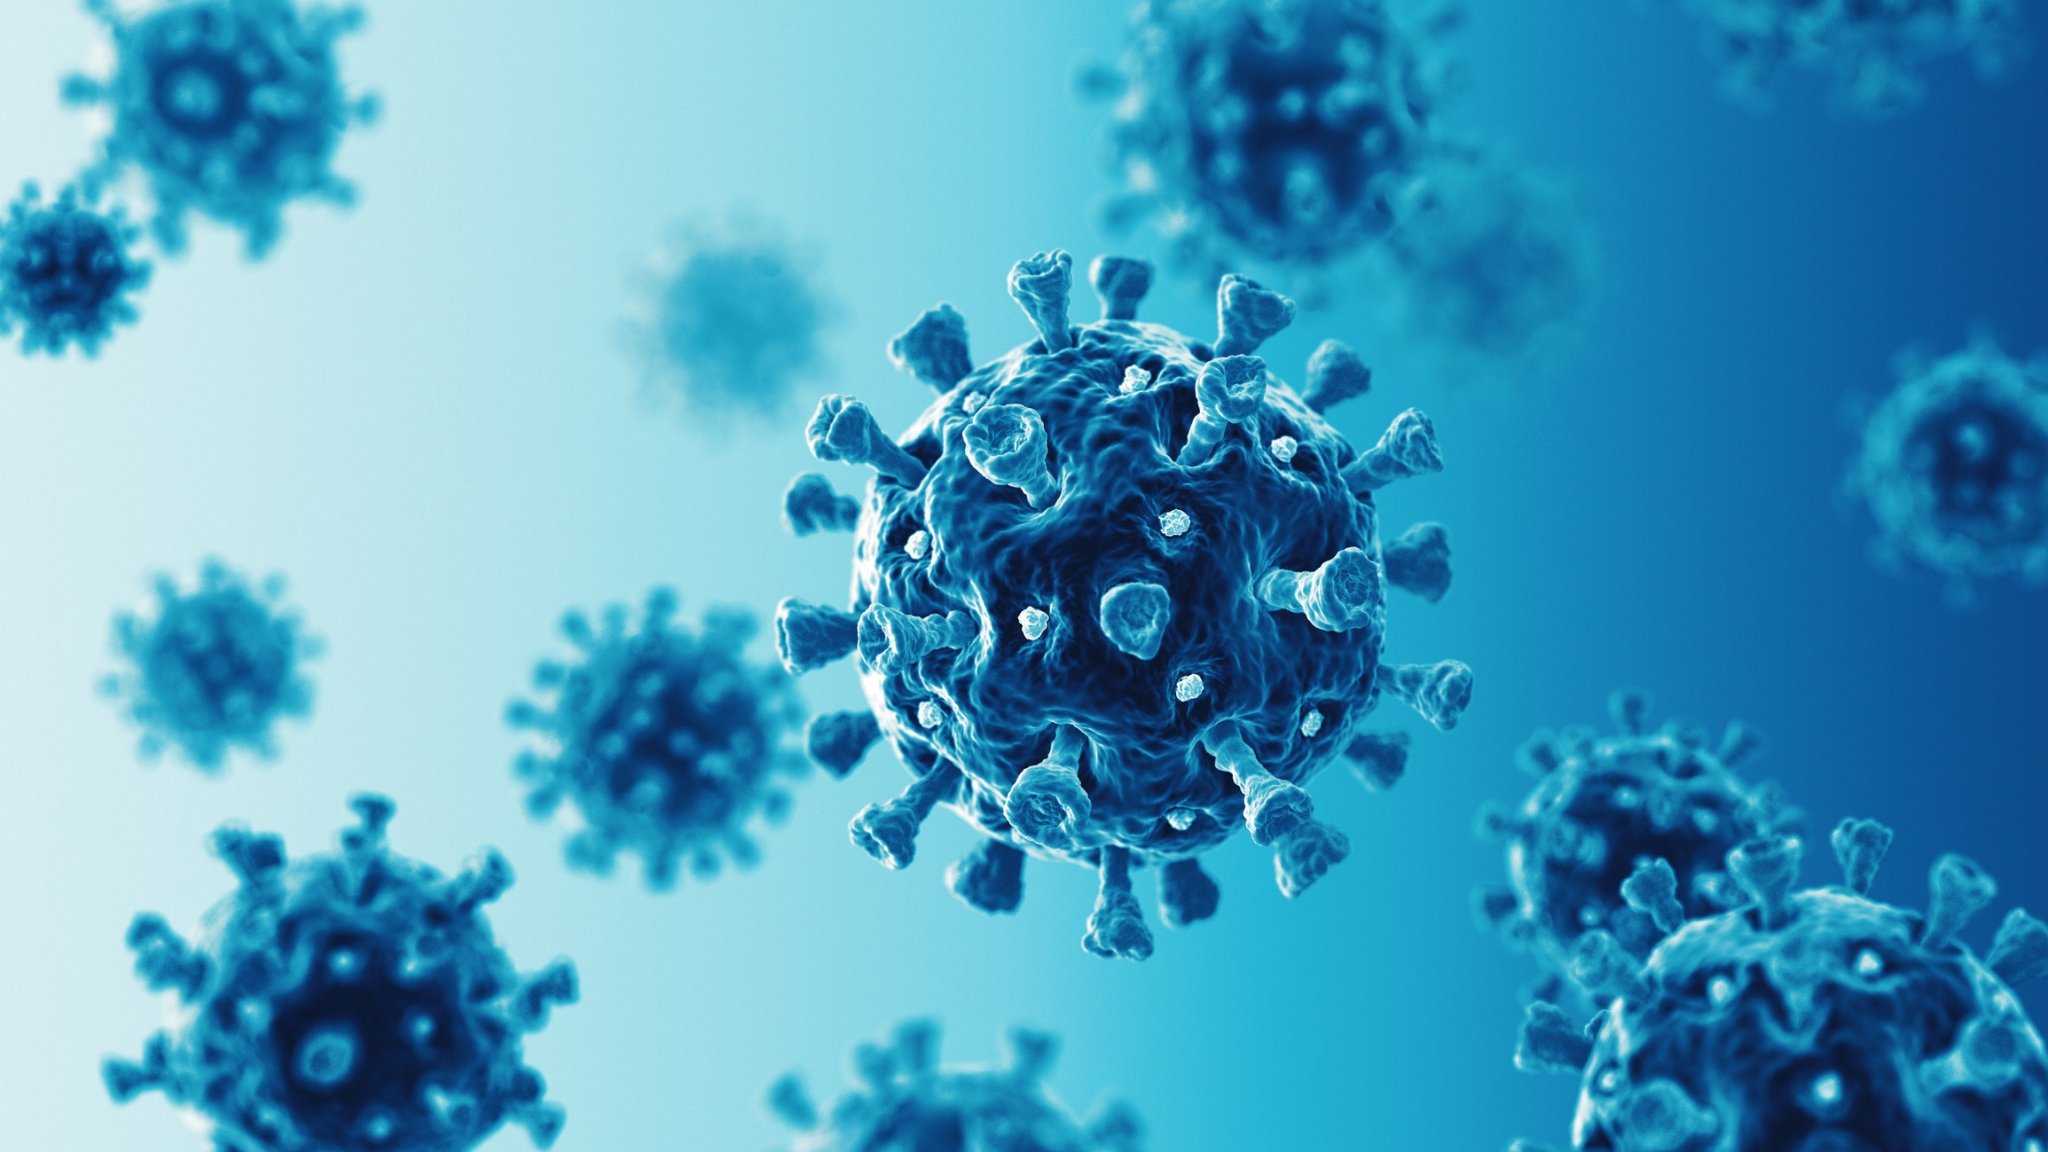 Record number of daily new coronavirus cases reported in Washington state